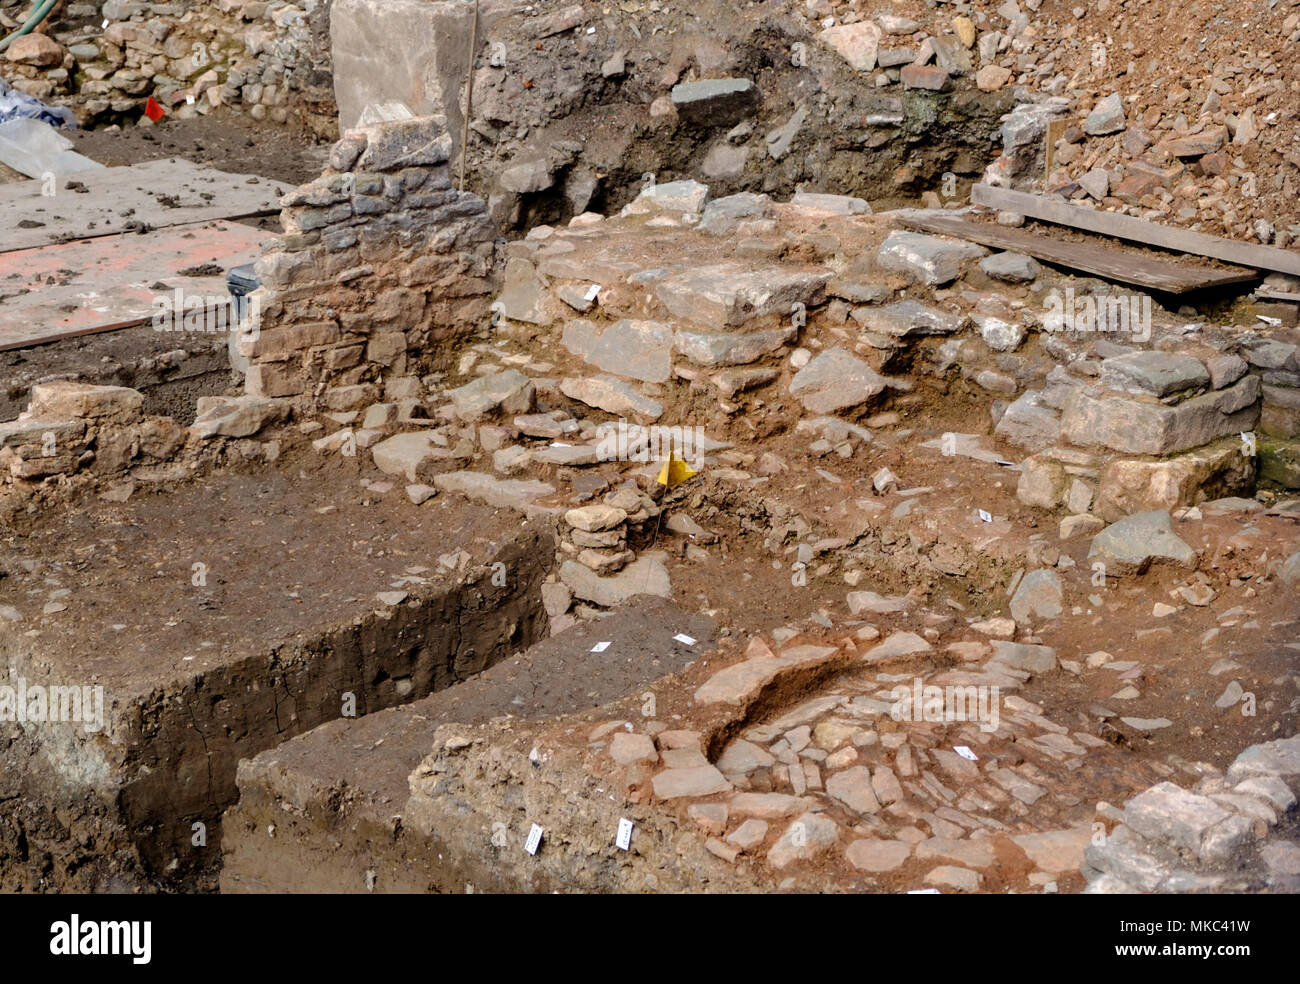 Archeological excavation in the Redcliffe quarter Bristol city center england UK Stock Photo